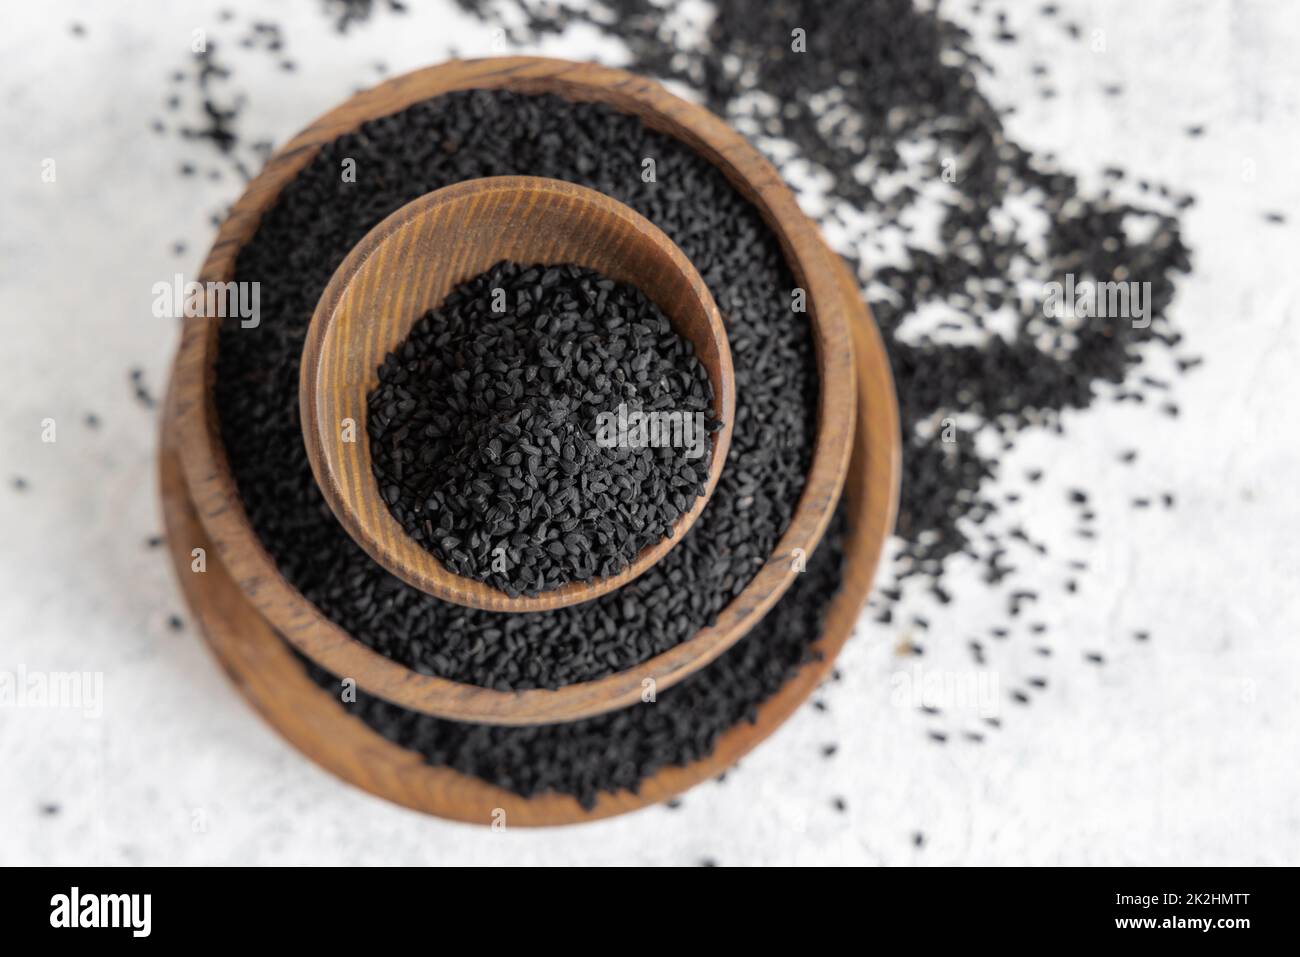 Indian spice Black cumin (nigella sativa or kalonji) seeds in wooden bowls top view Stock Photo